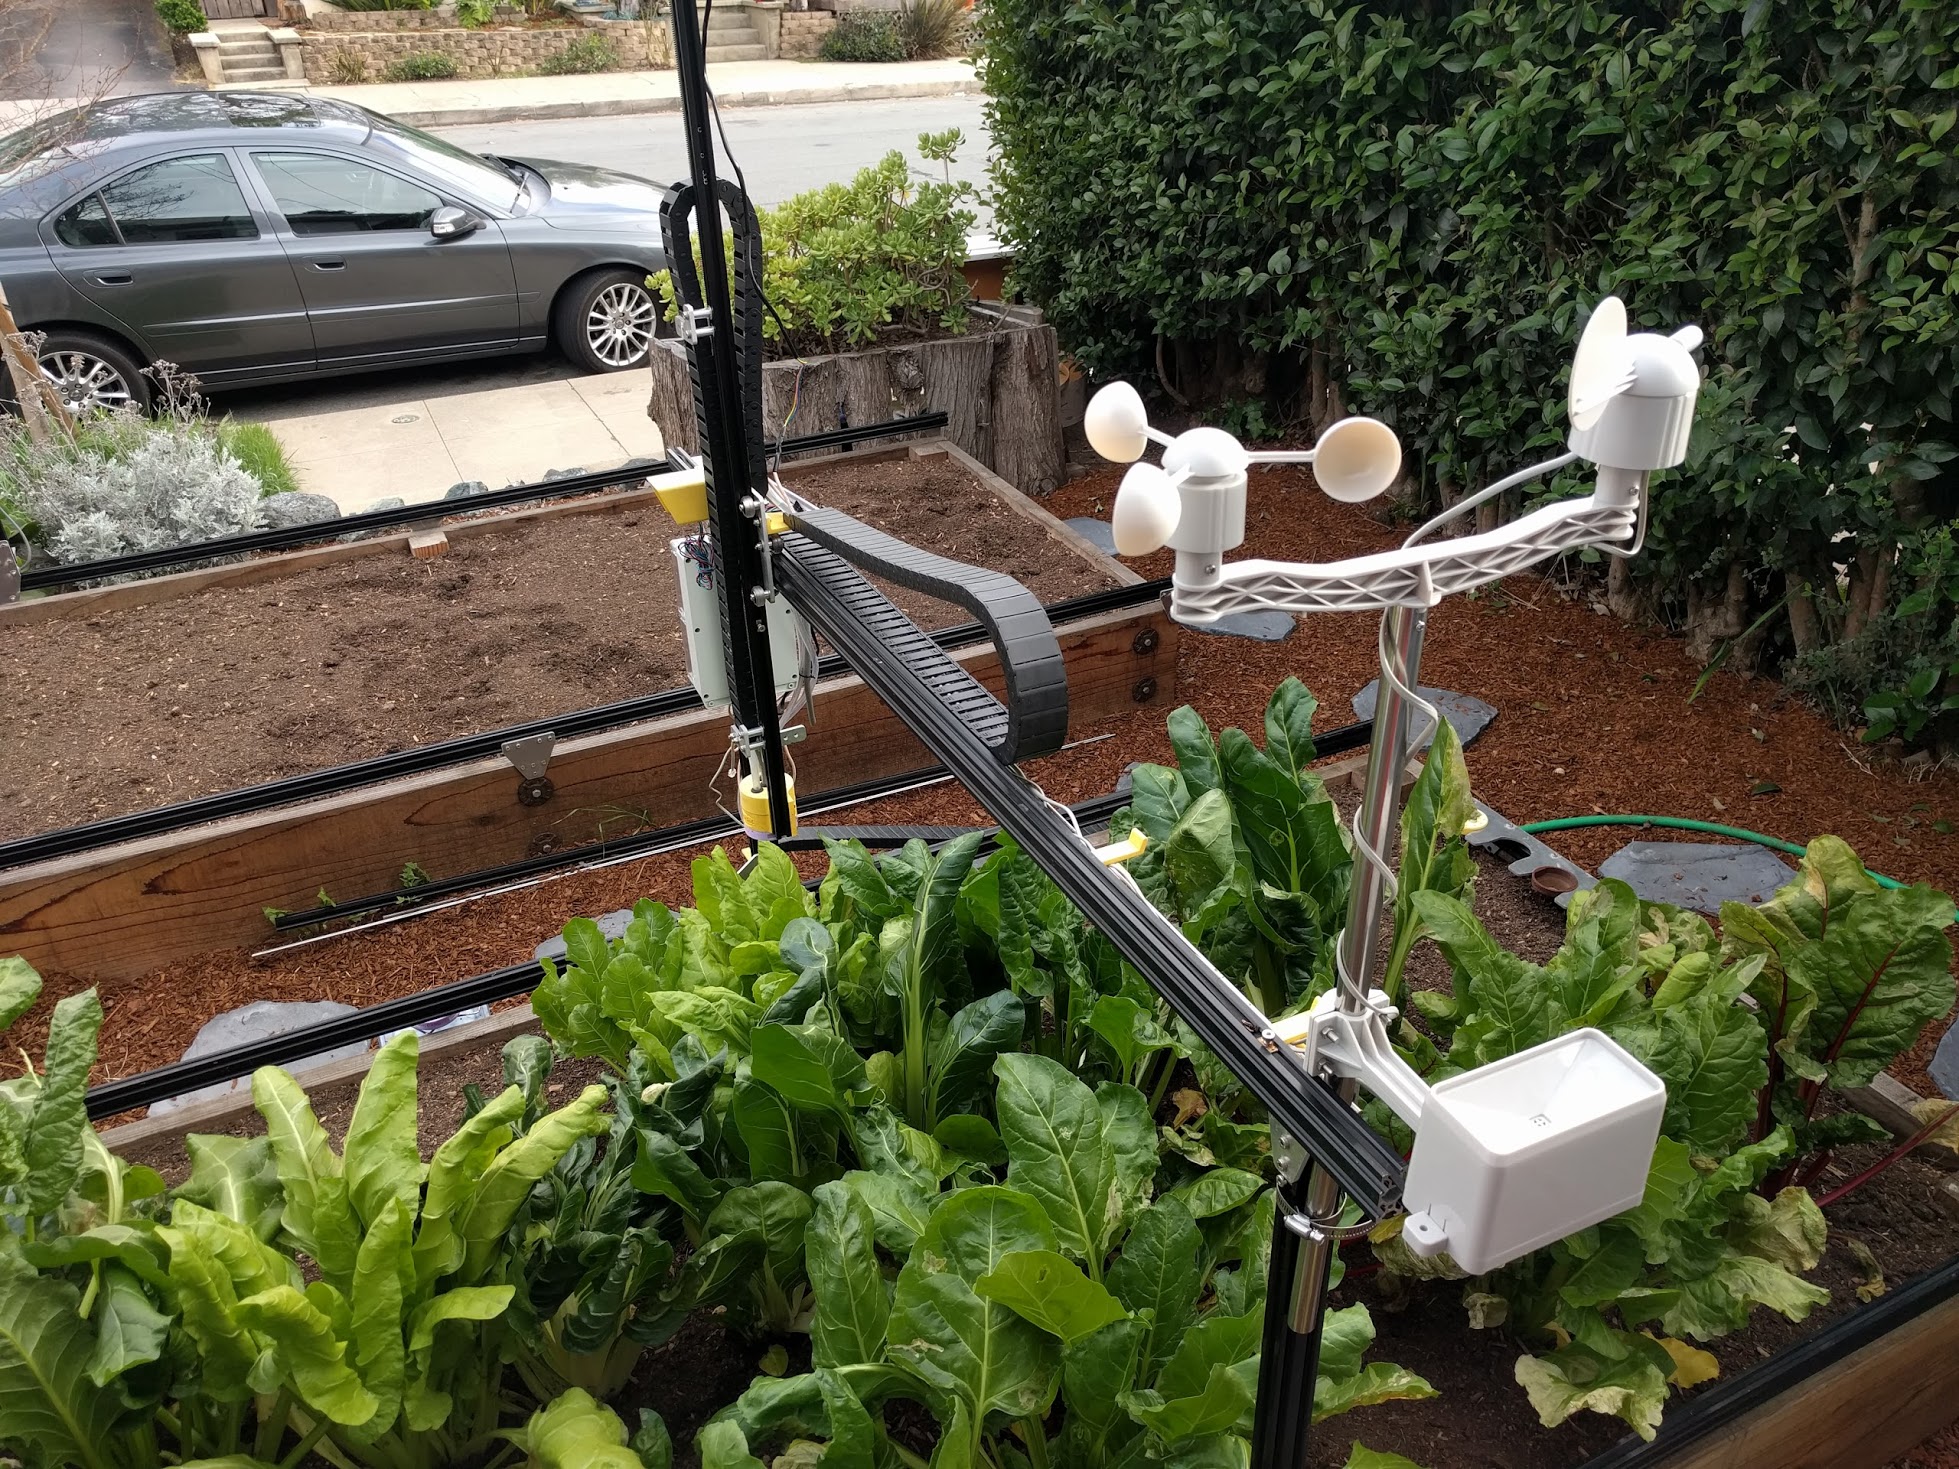 This FarmBot has been augmented with a weather station